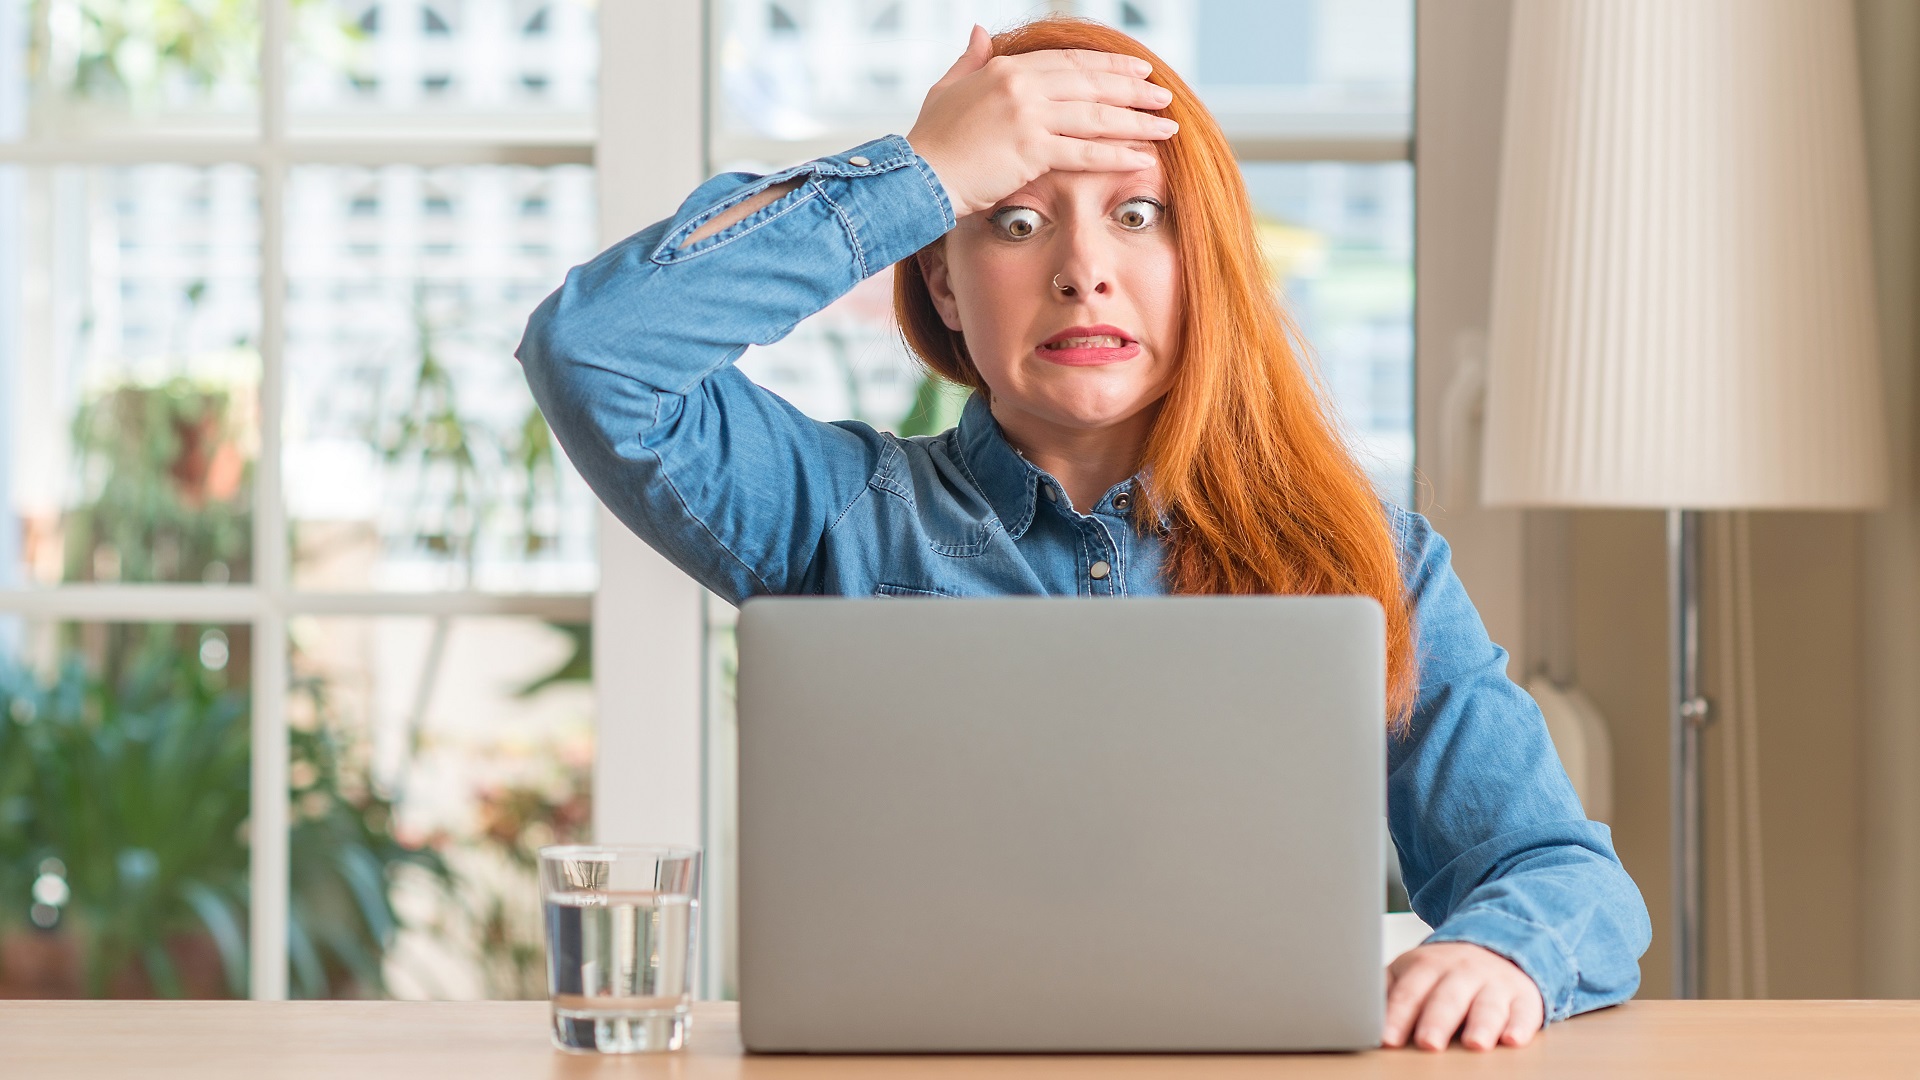 stresses surprised woman laptop hands on head_iStock-1041334030